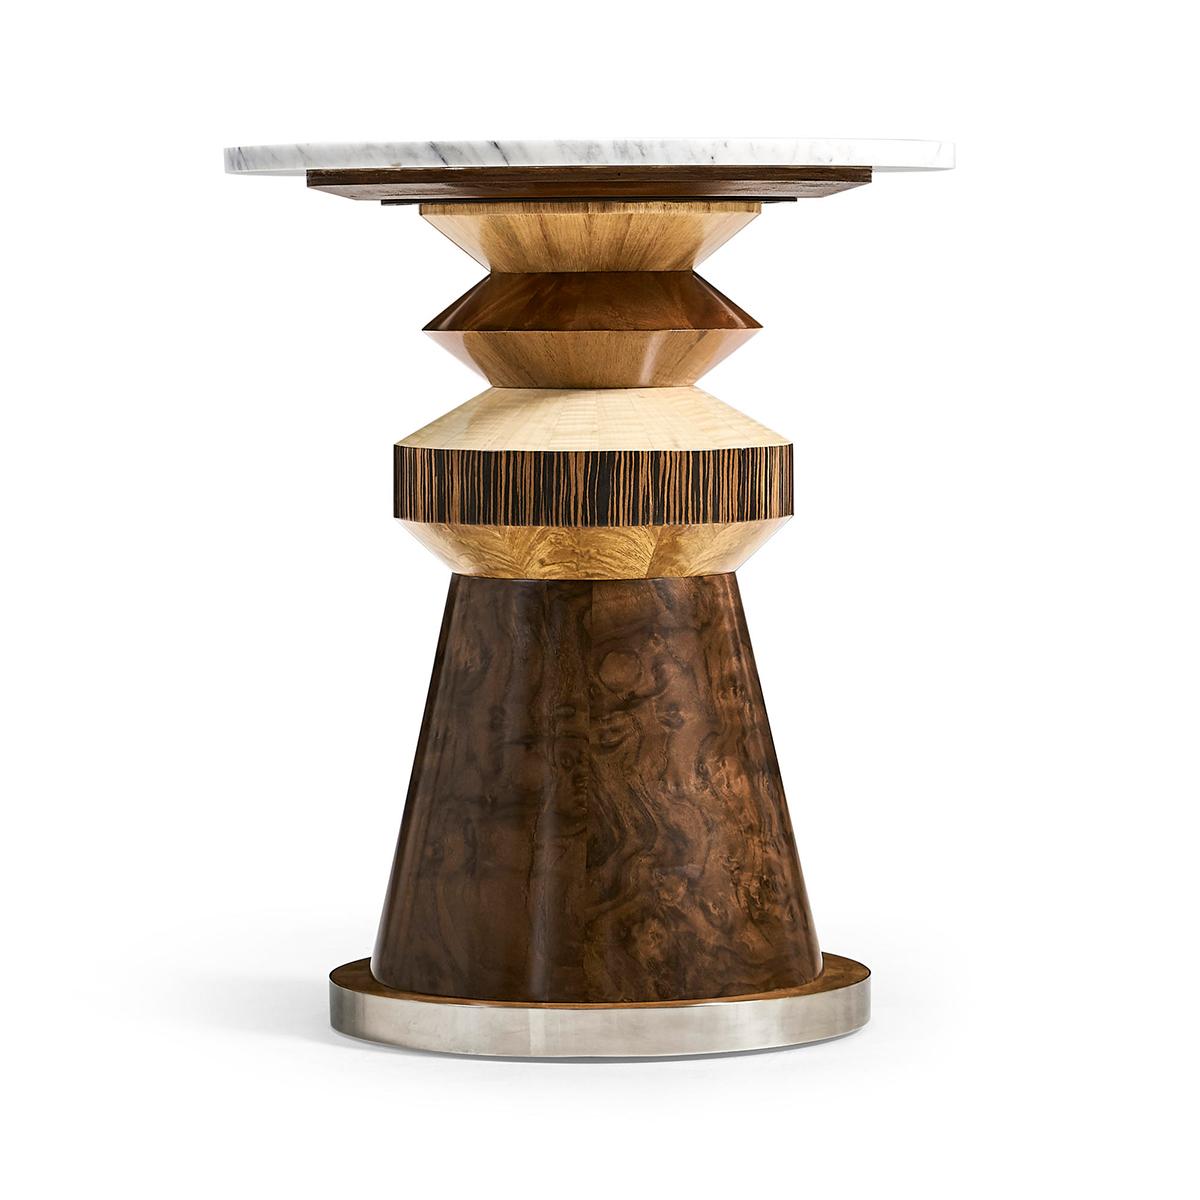 Crafted from an array of layered veneers - walnut burl, cerajeira, ebony, maple, chestnut, and eucalyptus—this table boasts a rich and captivating appearance. The various finishes highlight the intricate patterns of the veneers, creating a visual